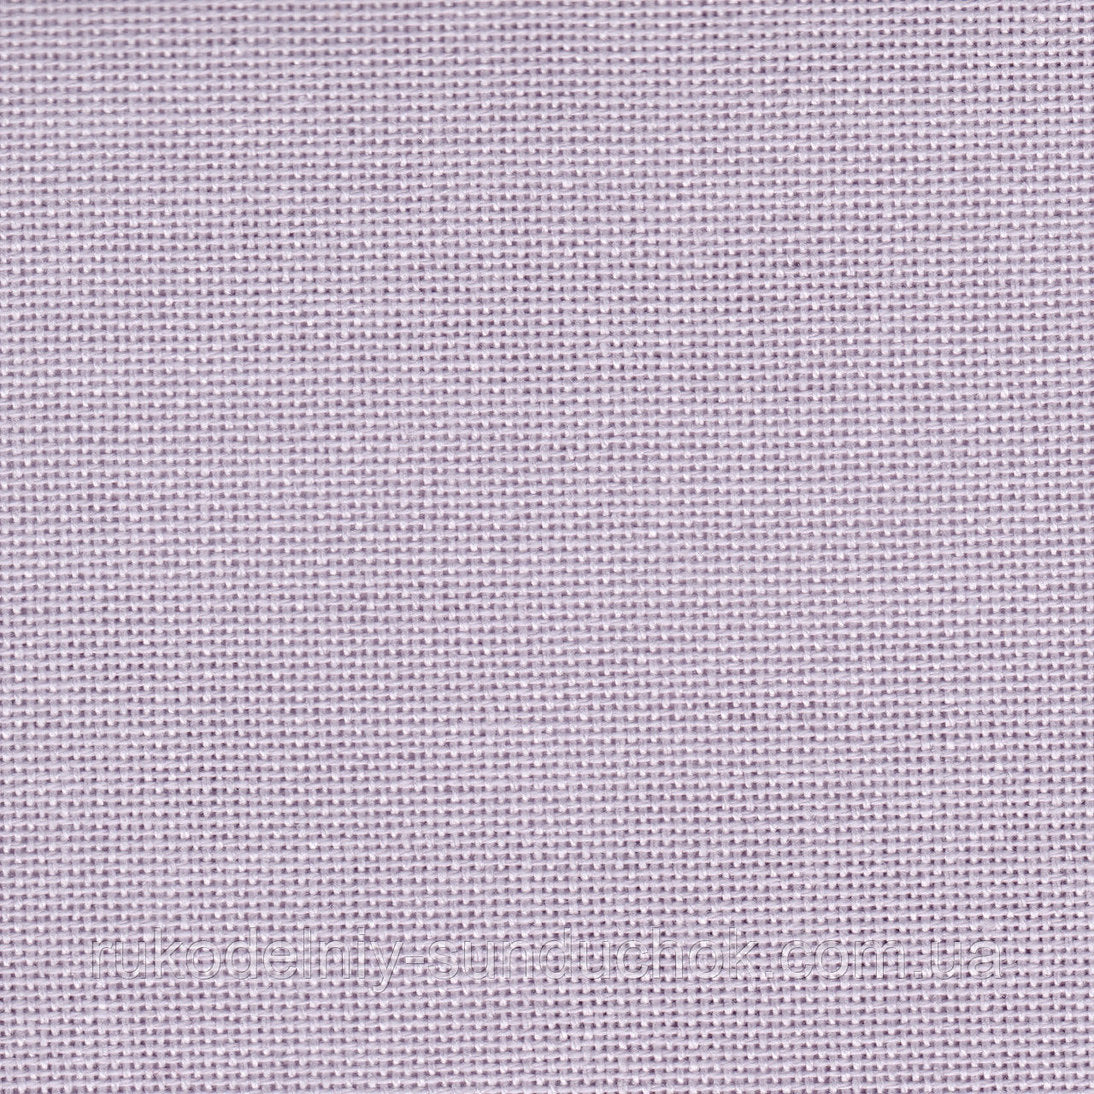 Murano Lugana fabric 32 ct. Lilac by ZWEIGART - Elegant and Regular Weft for Counted Thread Embroidery 3984/558